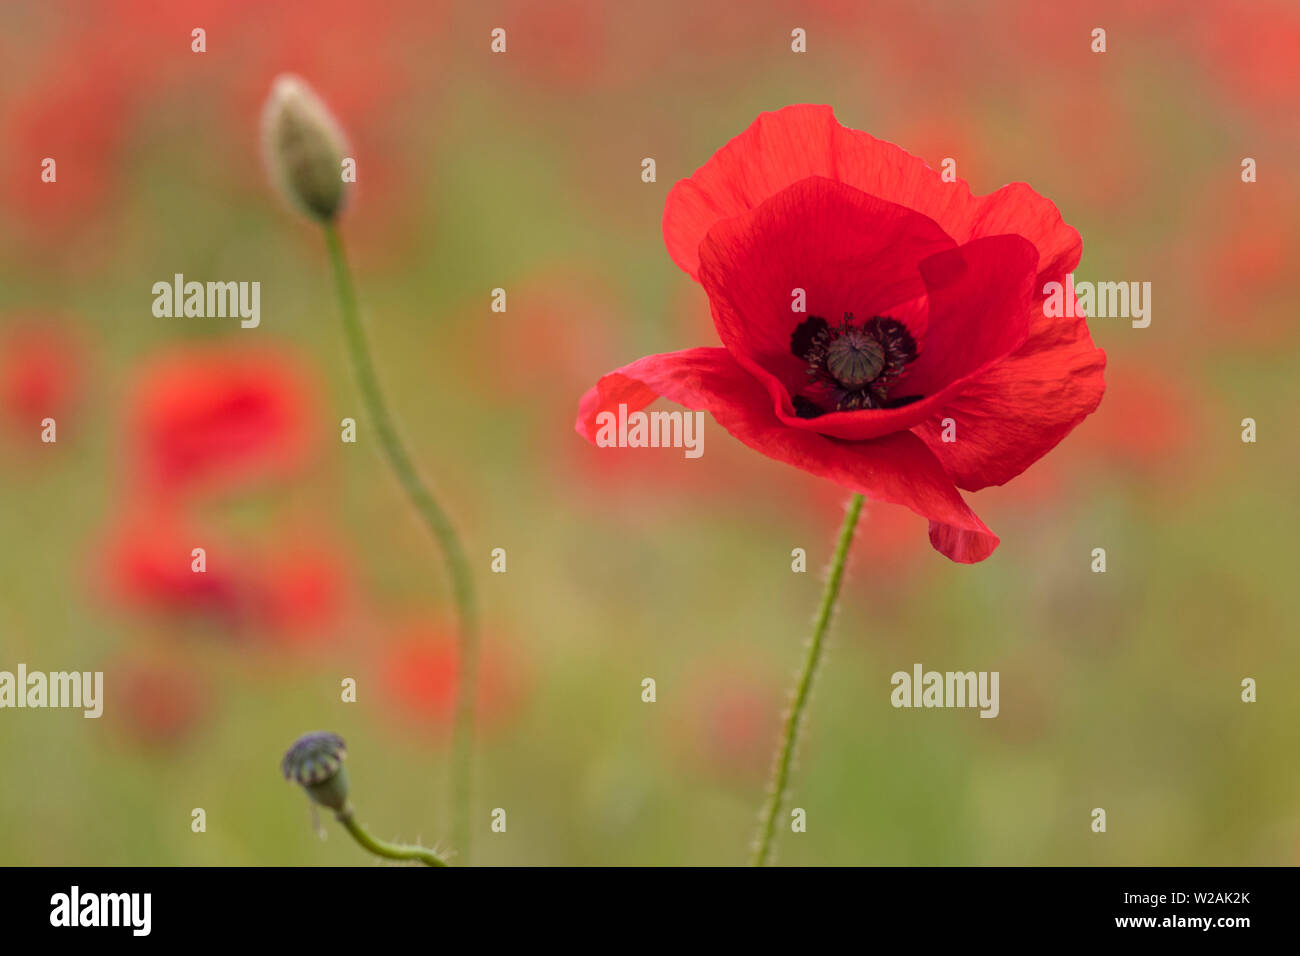 Flower of wild poppy (Papaver rhoeas) with out of focus flowers in background, Cambridgeshire Stock Photo